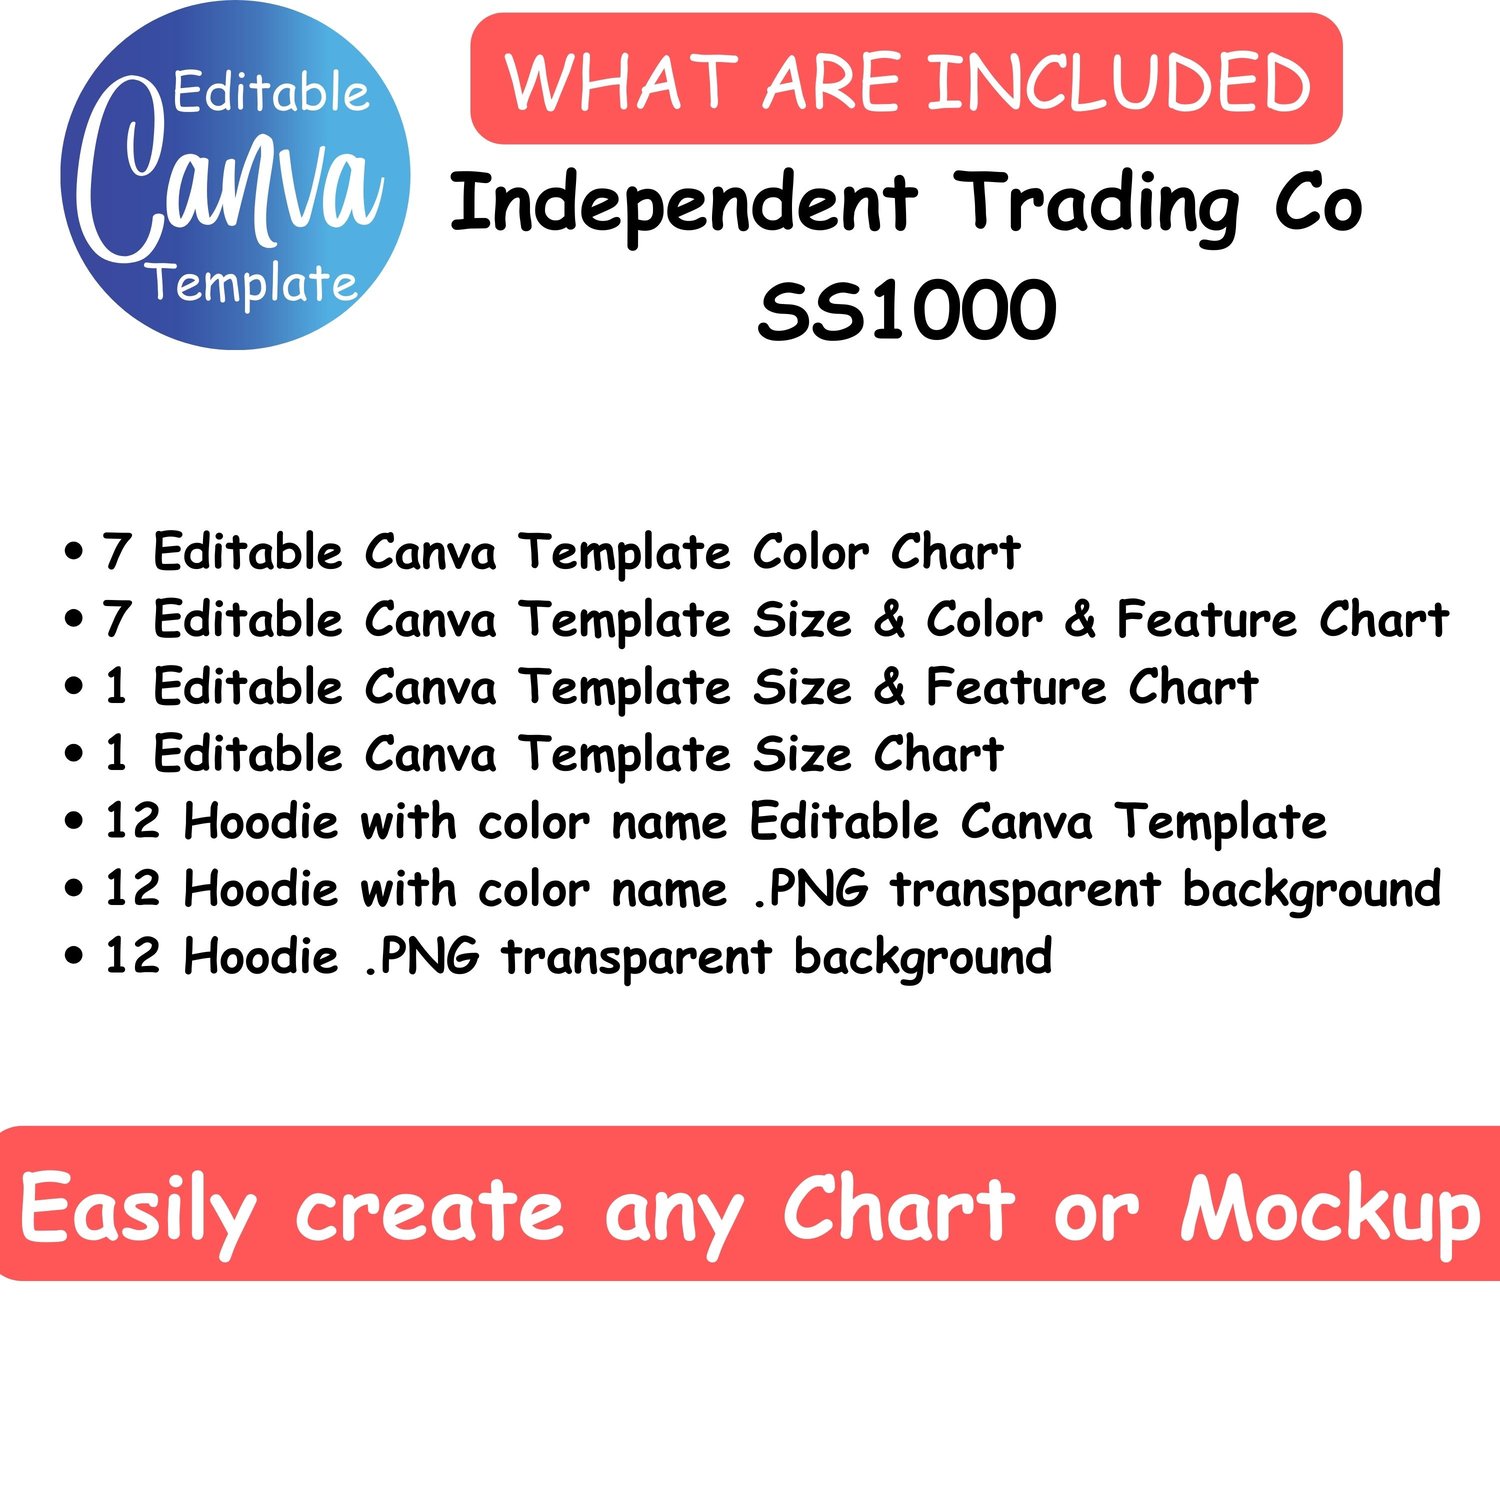 Independent Trading Co. - Size Chart 